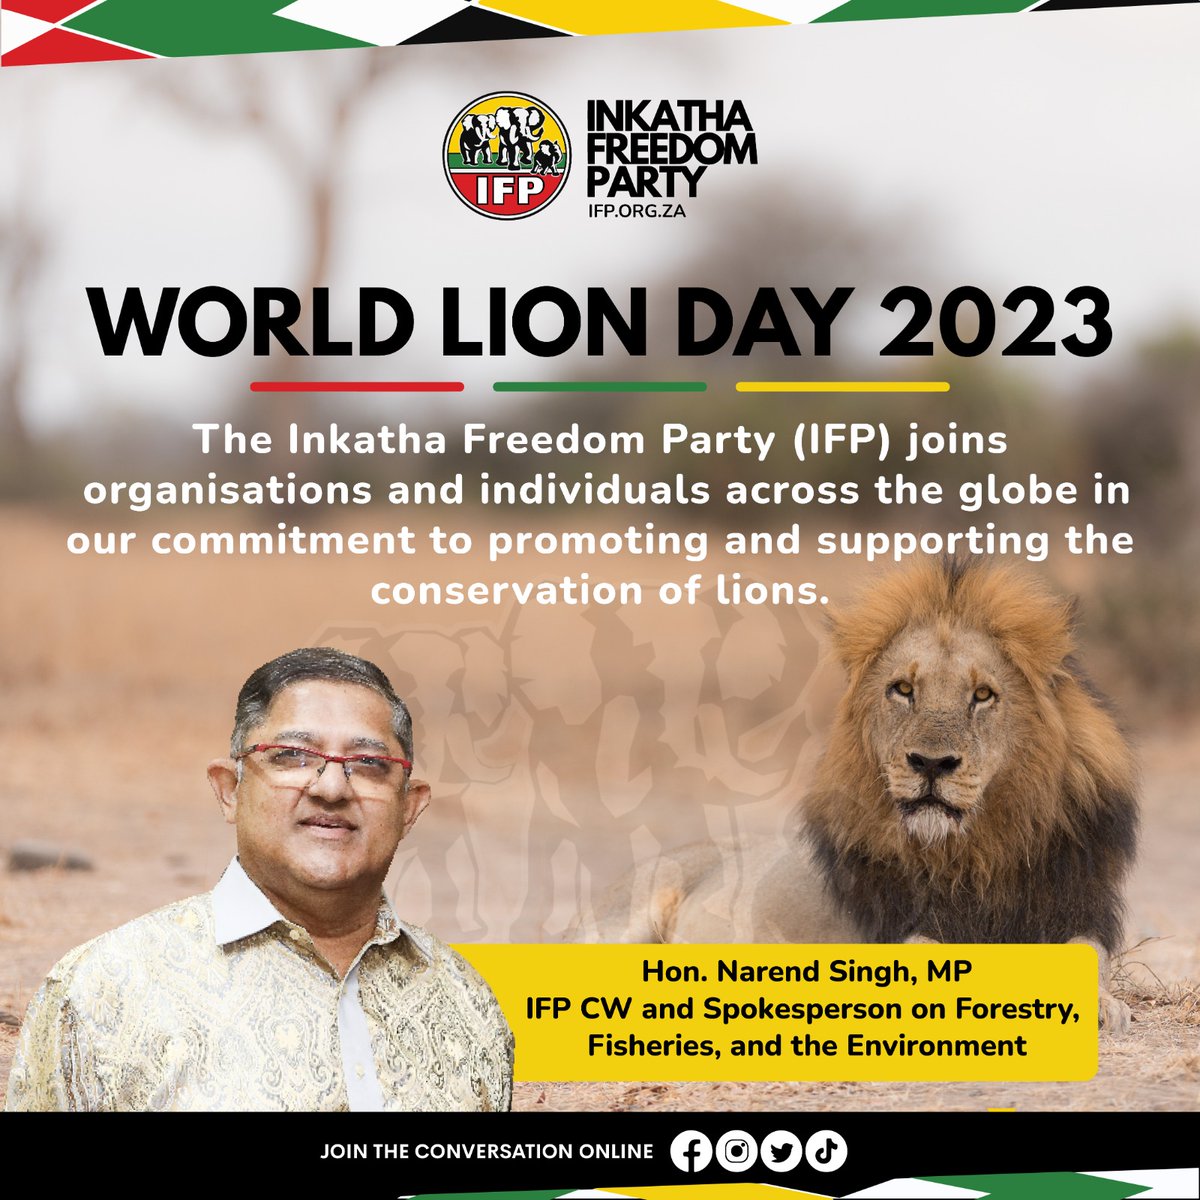 IFP: WORLD LION DAY 2023 As the IFP – and as South Africans – we have a responsibility to protect our country’s glorious flora and fauna - including our lions - for this, and the next generation. #WorldLionDay #StopCaptiveLionBreeding #ProtectOurLions